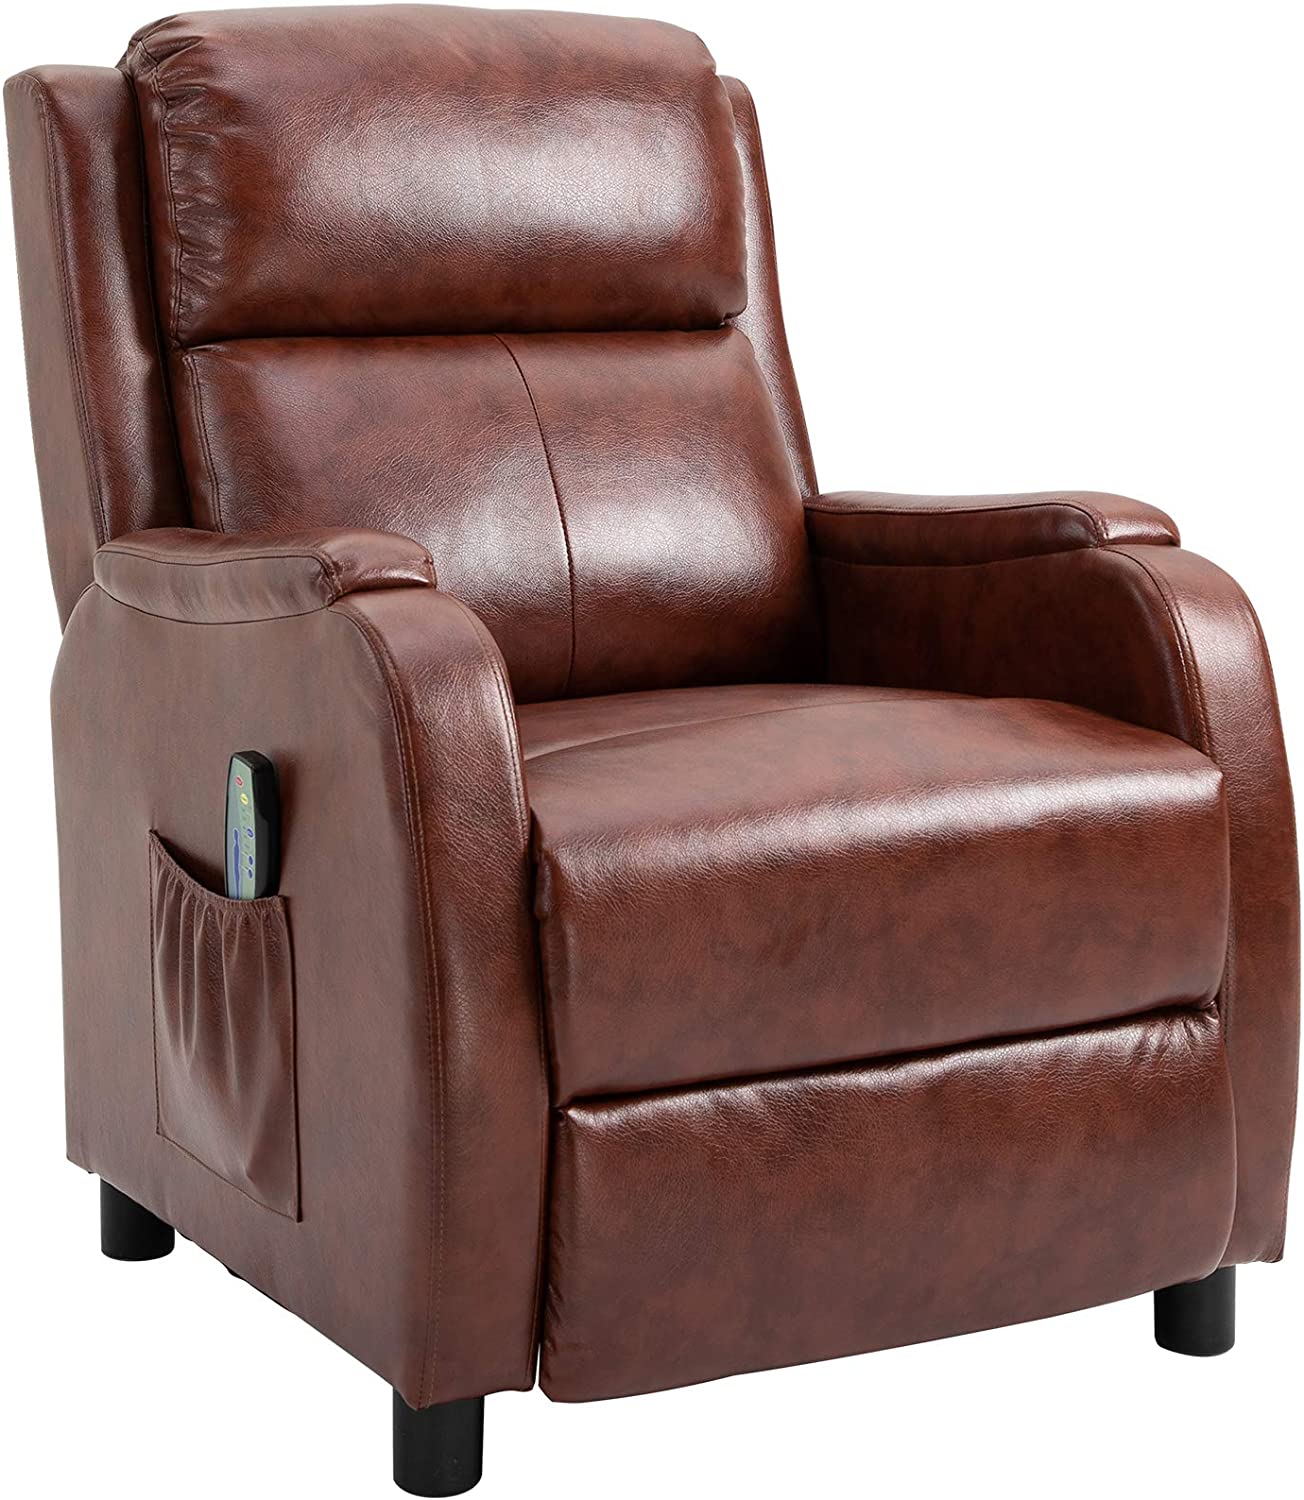 Top 5 Stylish Low Profile Leather Recliner Chairs - 2021 • Recliners Guide